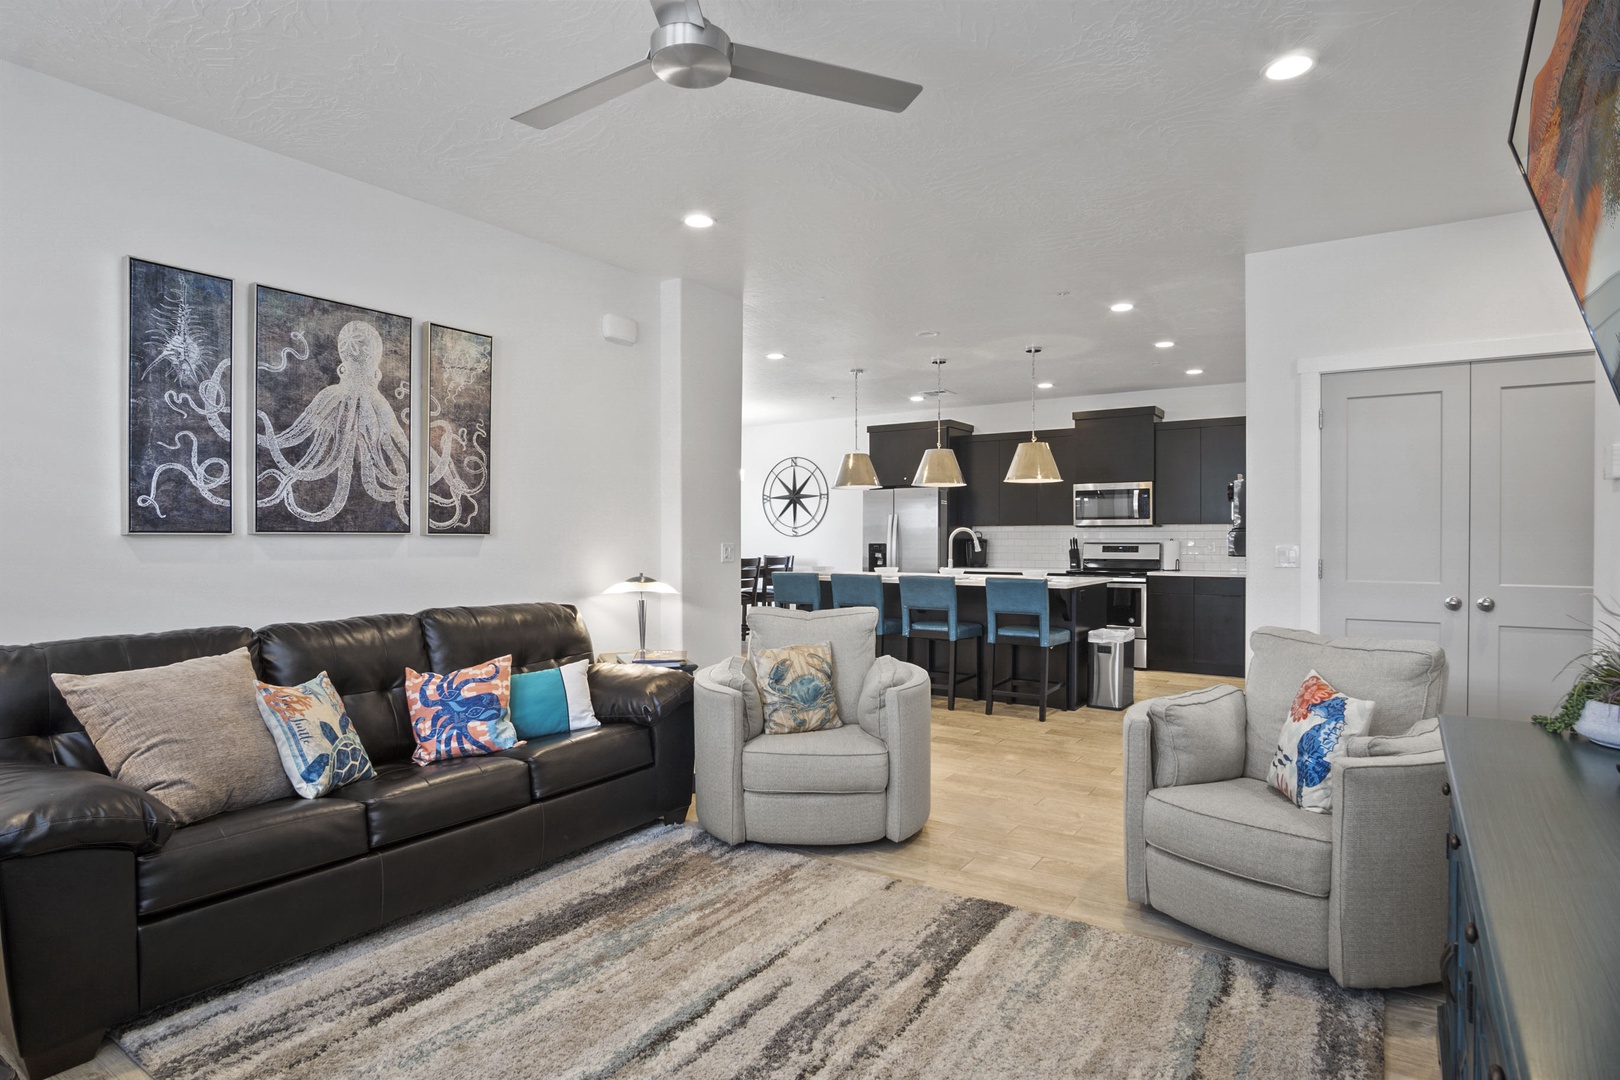 Enjoy staying connected in the updated, open Living/Dining and Kitchen spaces